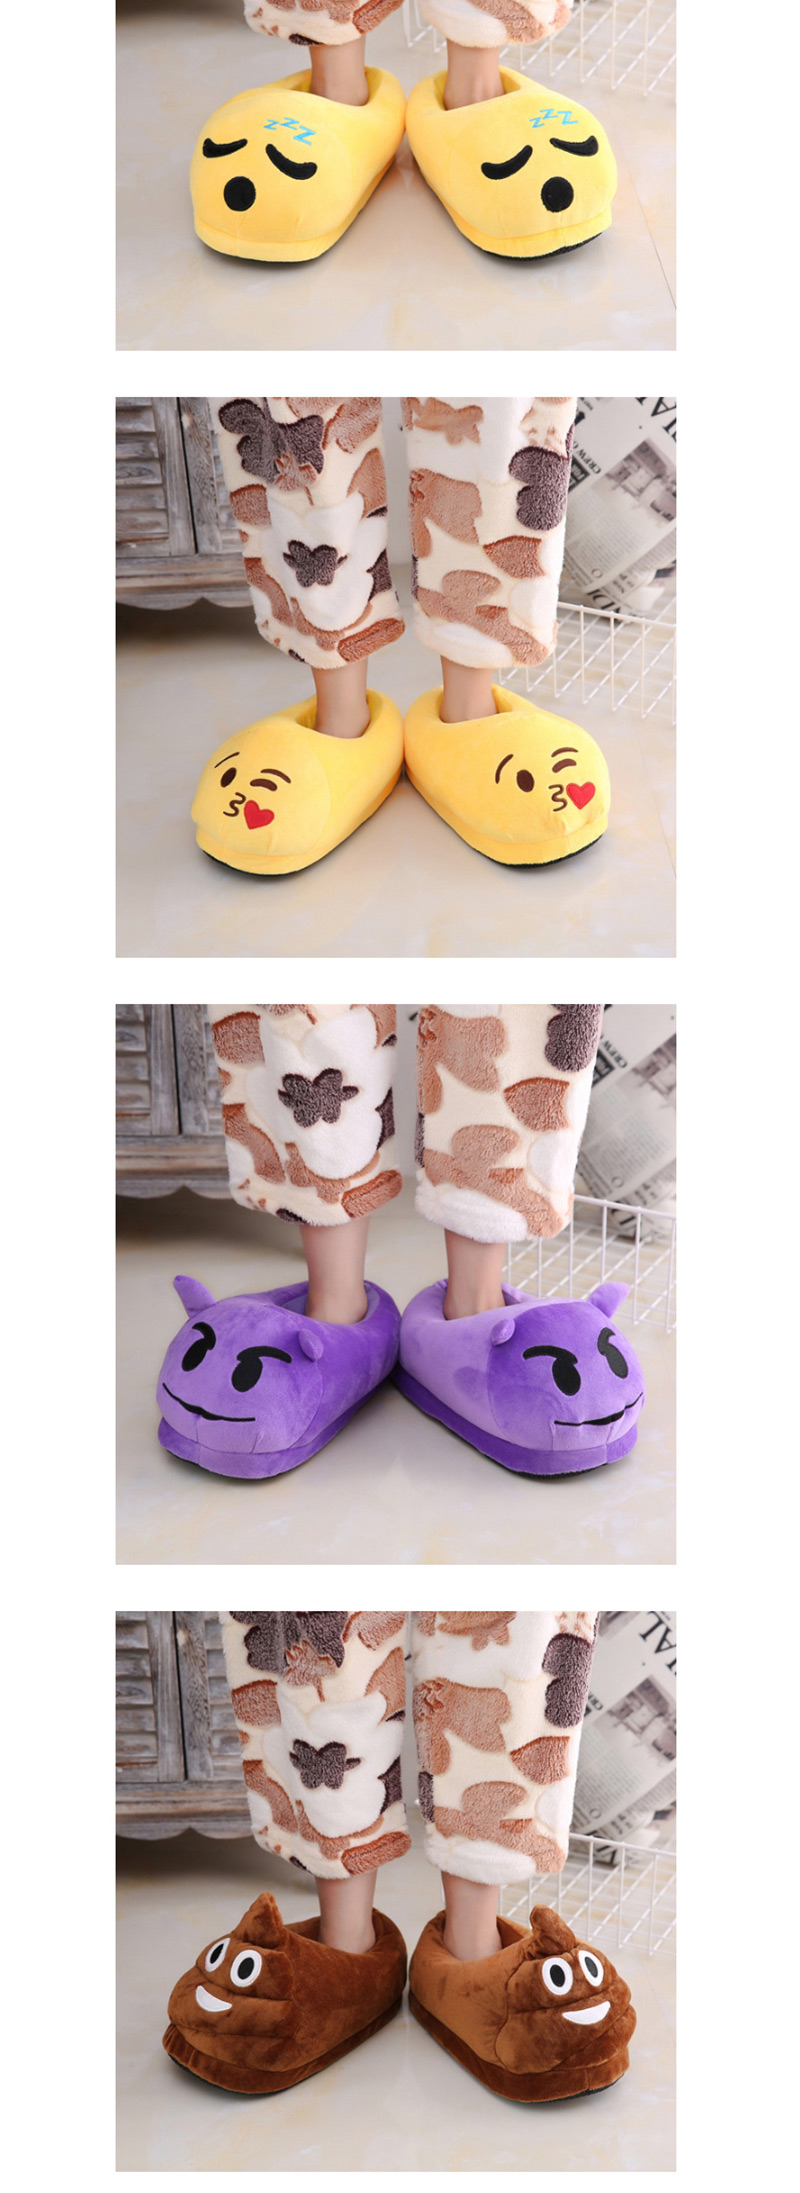 Fashion 13 Purple Cartoon Expression Plush Bag With Cotton Slippers,Slippers